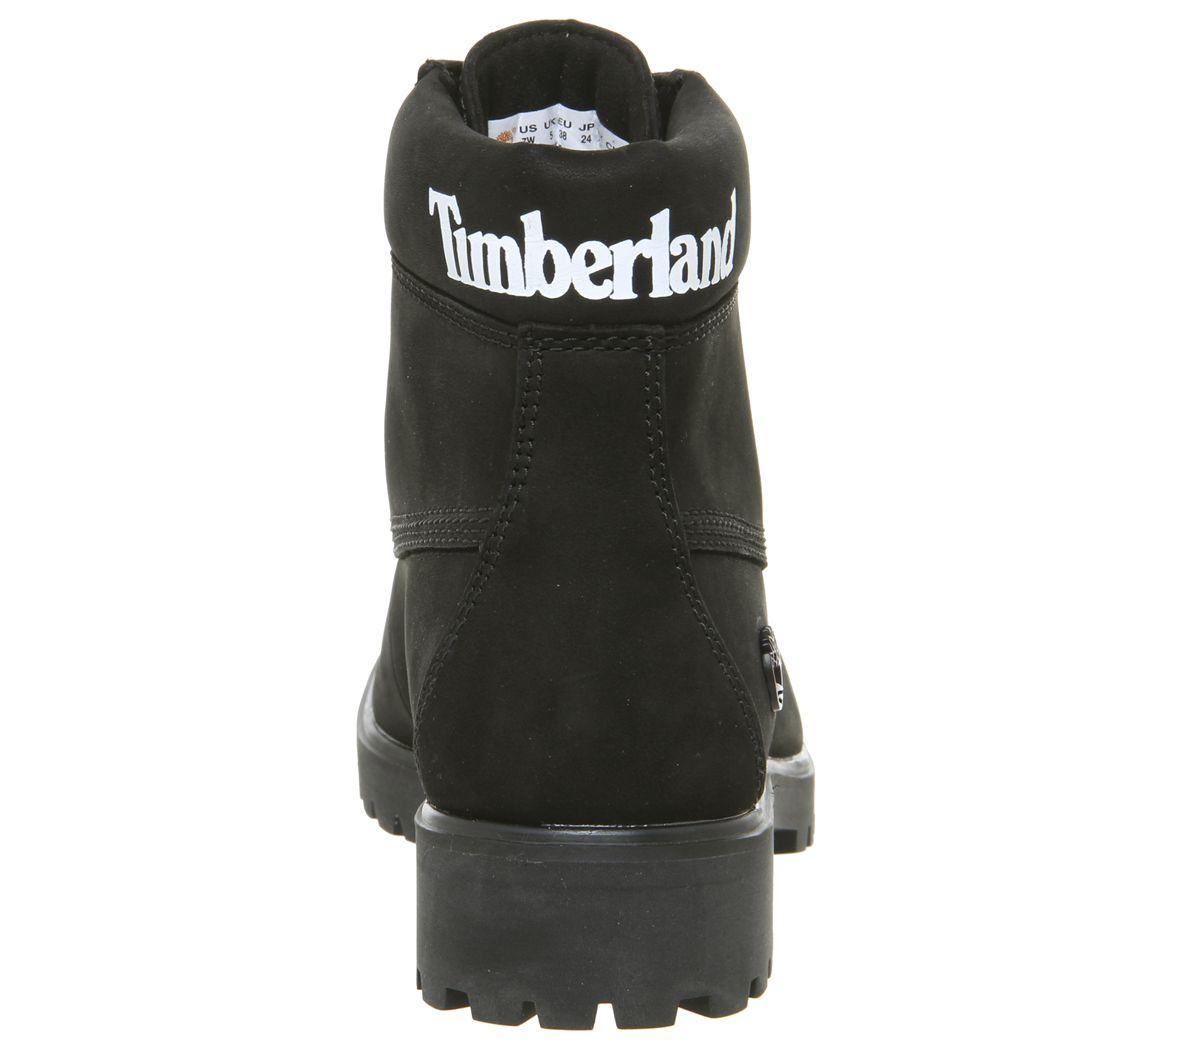 Timberland Boots Logo - Slim 6 Inch Logo Boots